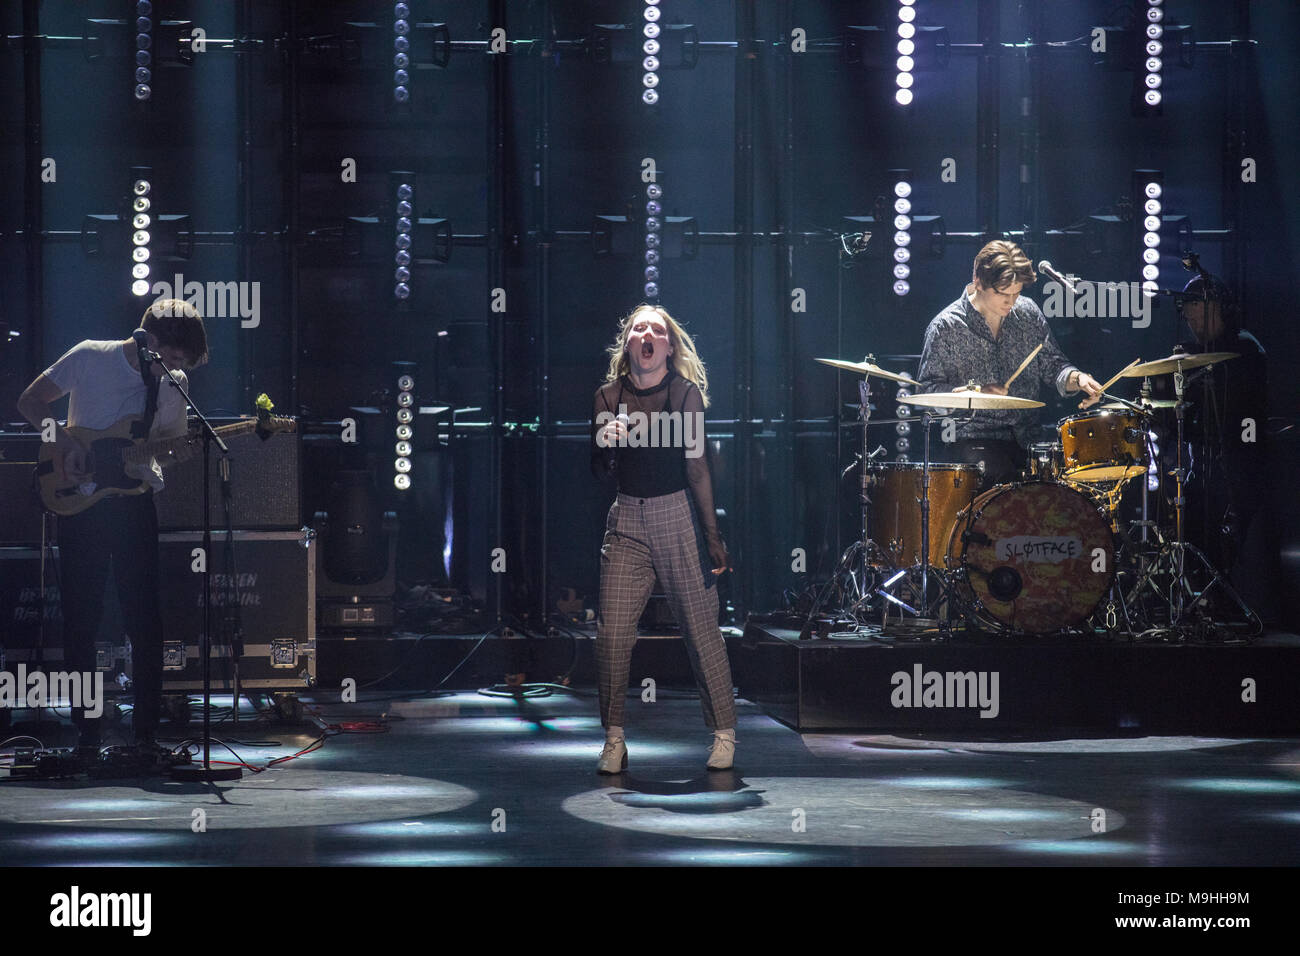 Norway, Oslo - February 25, 2018. The Norwegian pop-rock band Sløtface (formerly known as Slutface) performs live during the Norwegian Grammy Awards, Spellemannprisen 2017, at Oslo Konserthus in Oslo. (Photo credit: Gonzales Photo - Stian S. Moller). Stock Photo